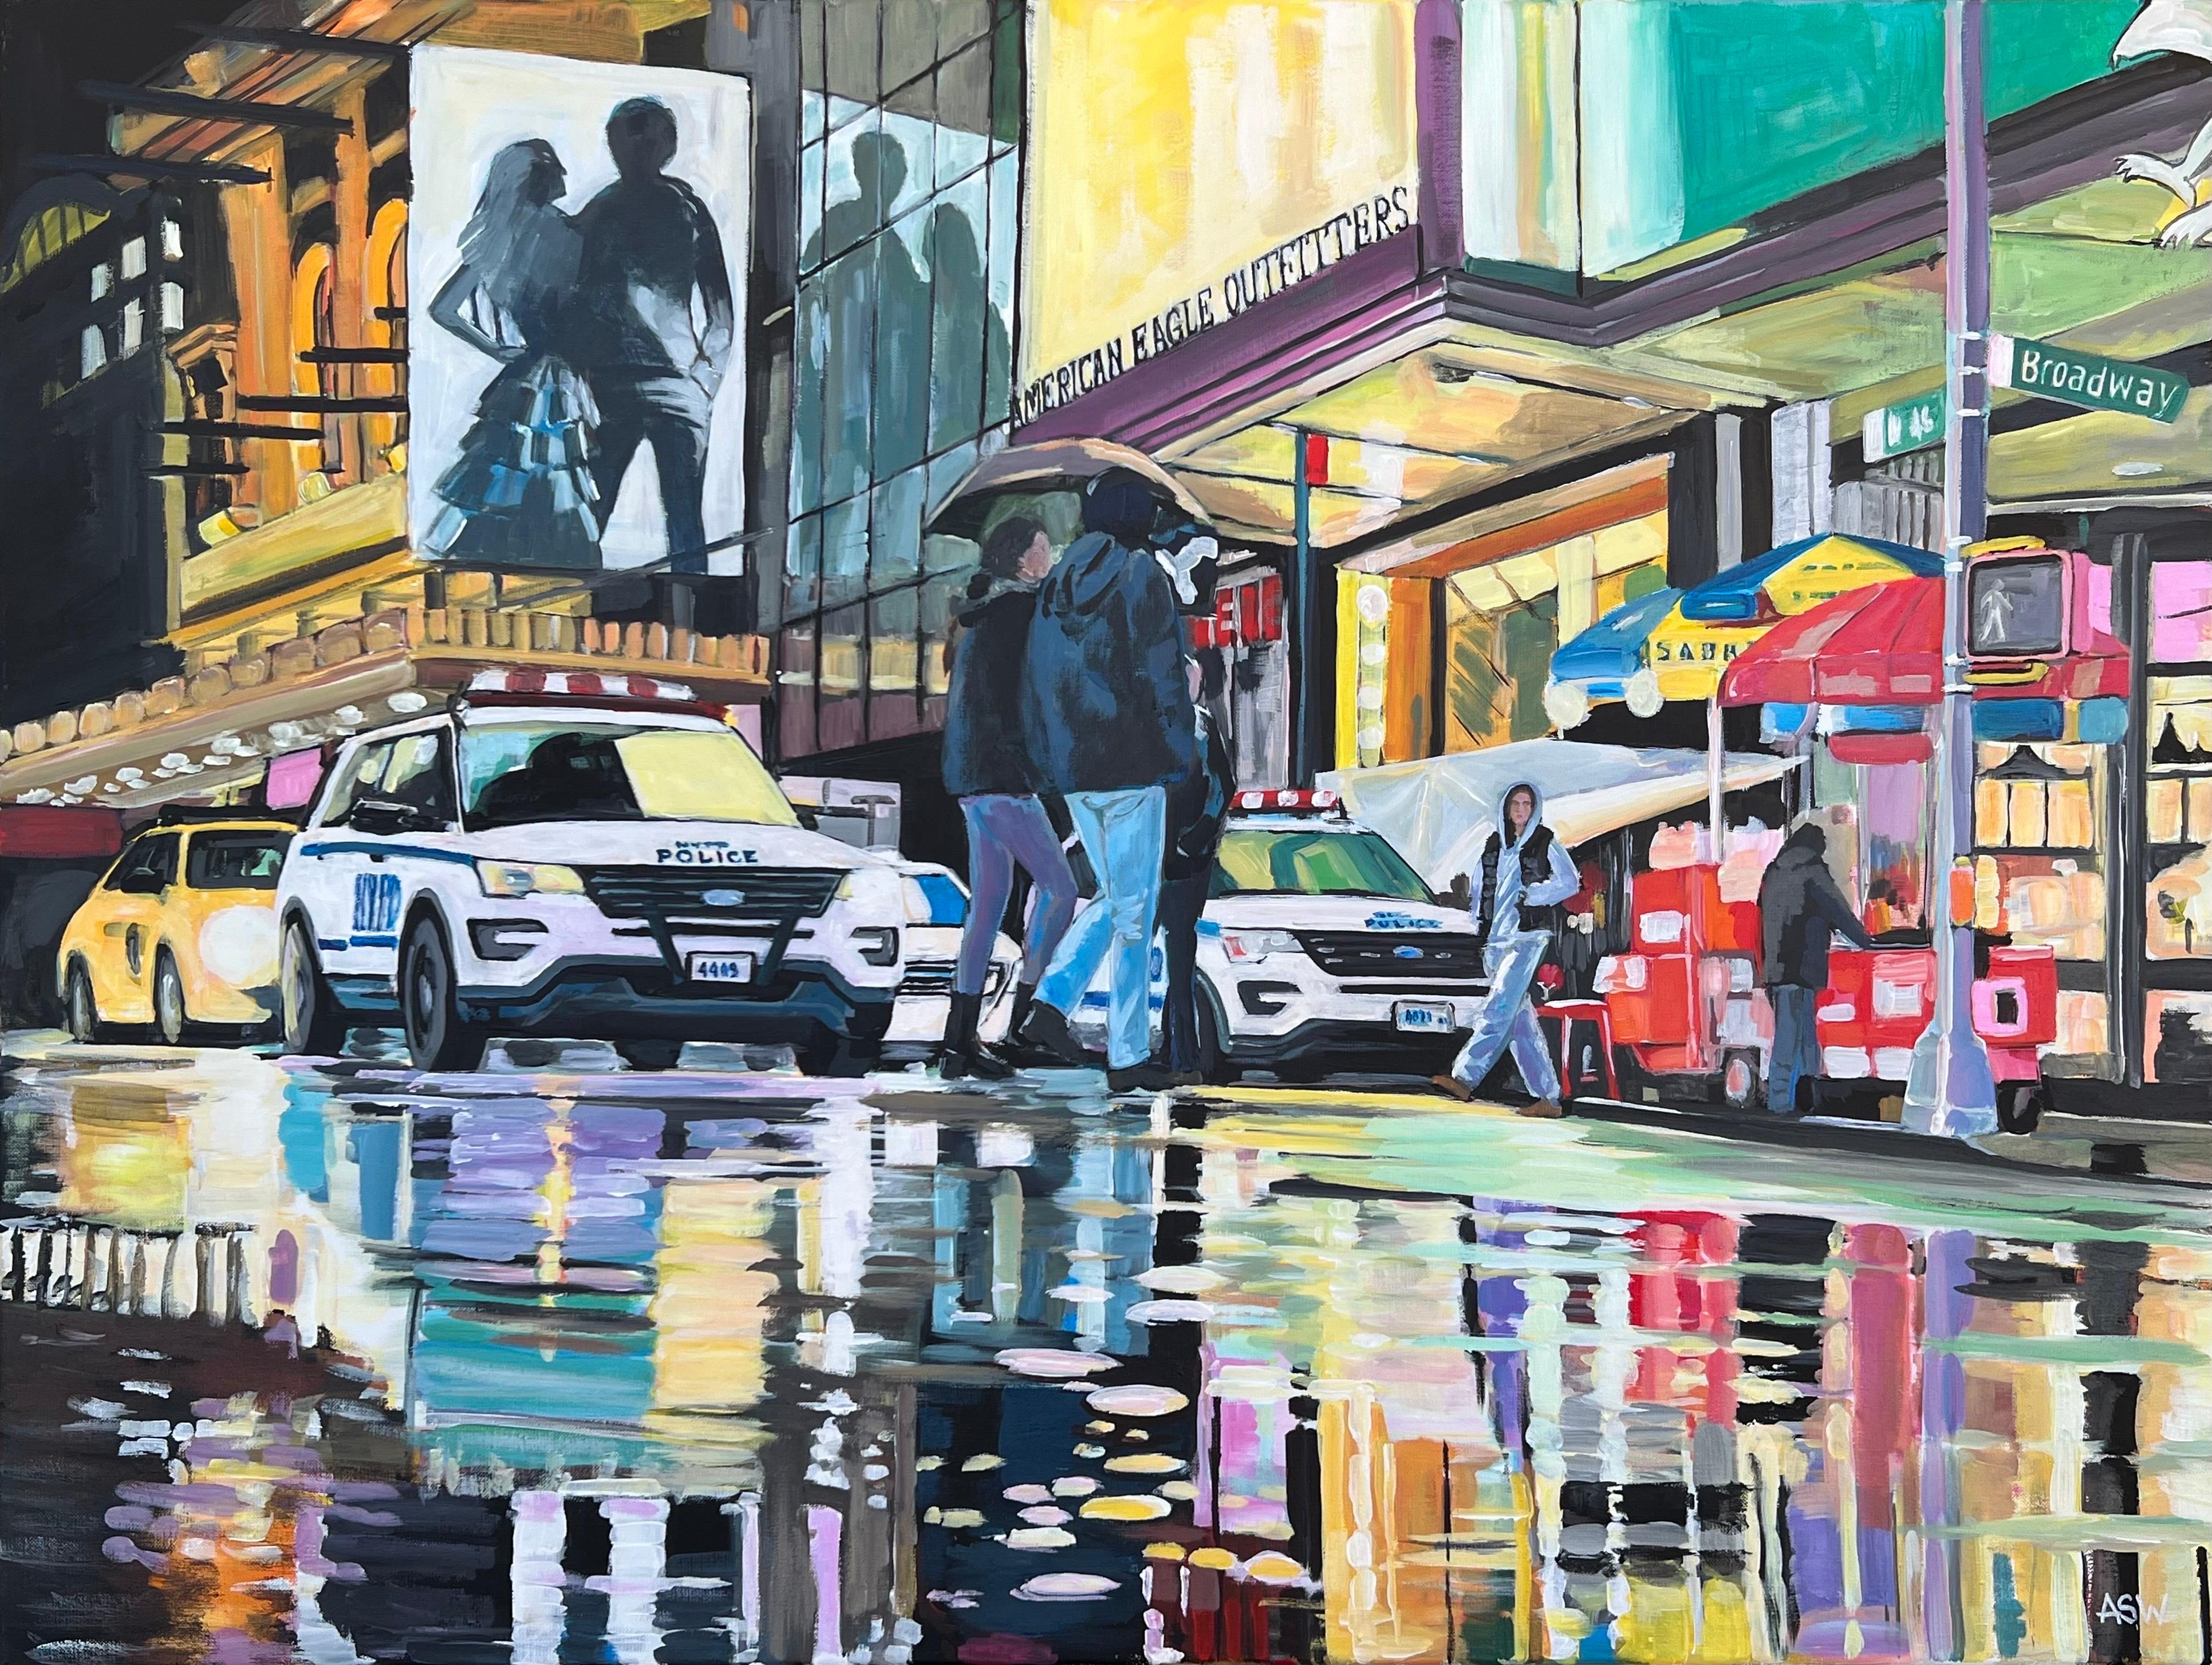 Neon Reflections in the New York City Rain, by Contemporary British Urban Artist, Angela Wakefield. This is a major work to continue her epic New York Series which now spans over a decade. 

Art measures 40 x 30 inches 

Wakefield's work is a unique